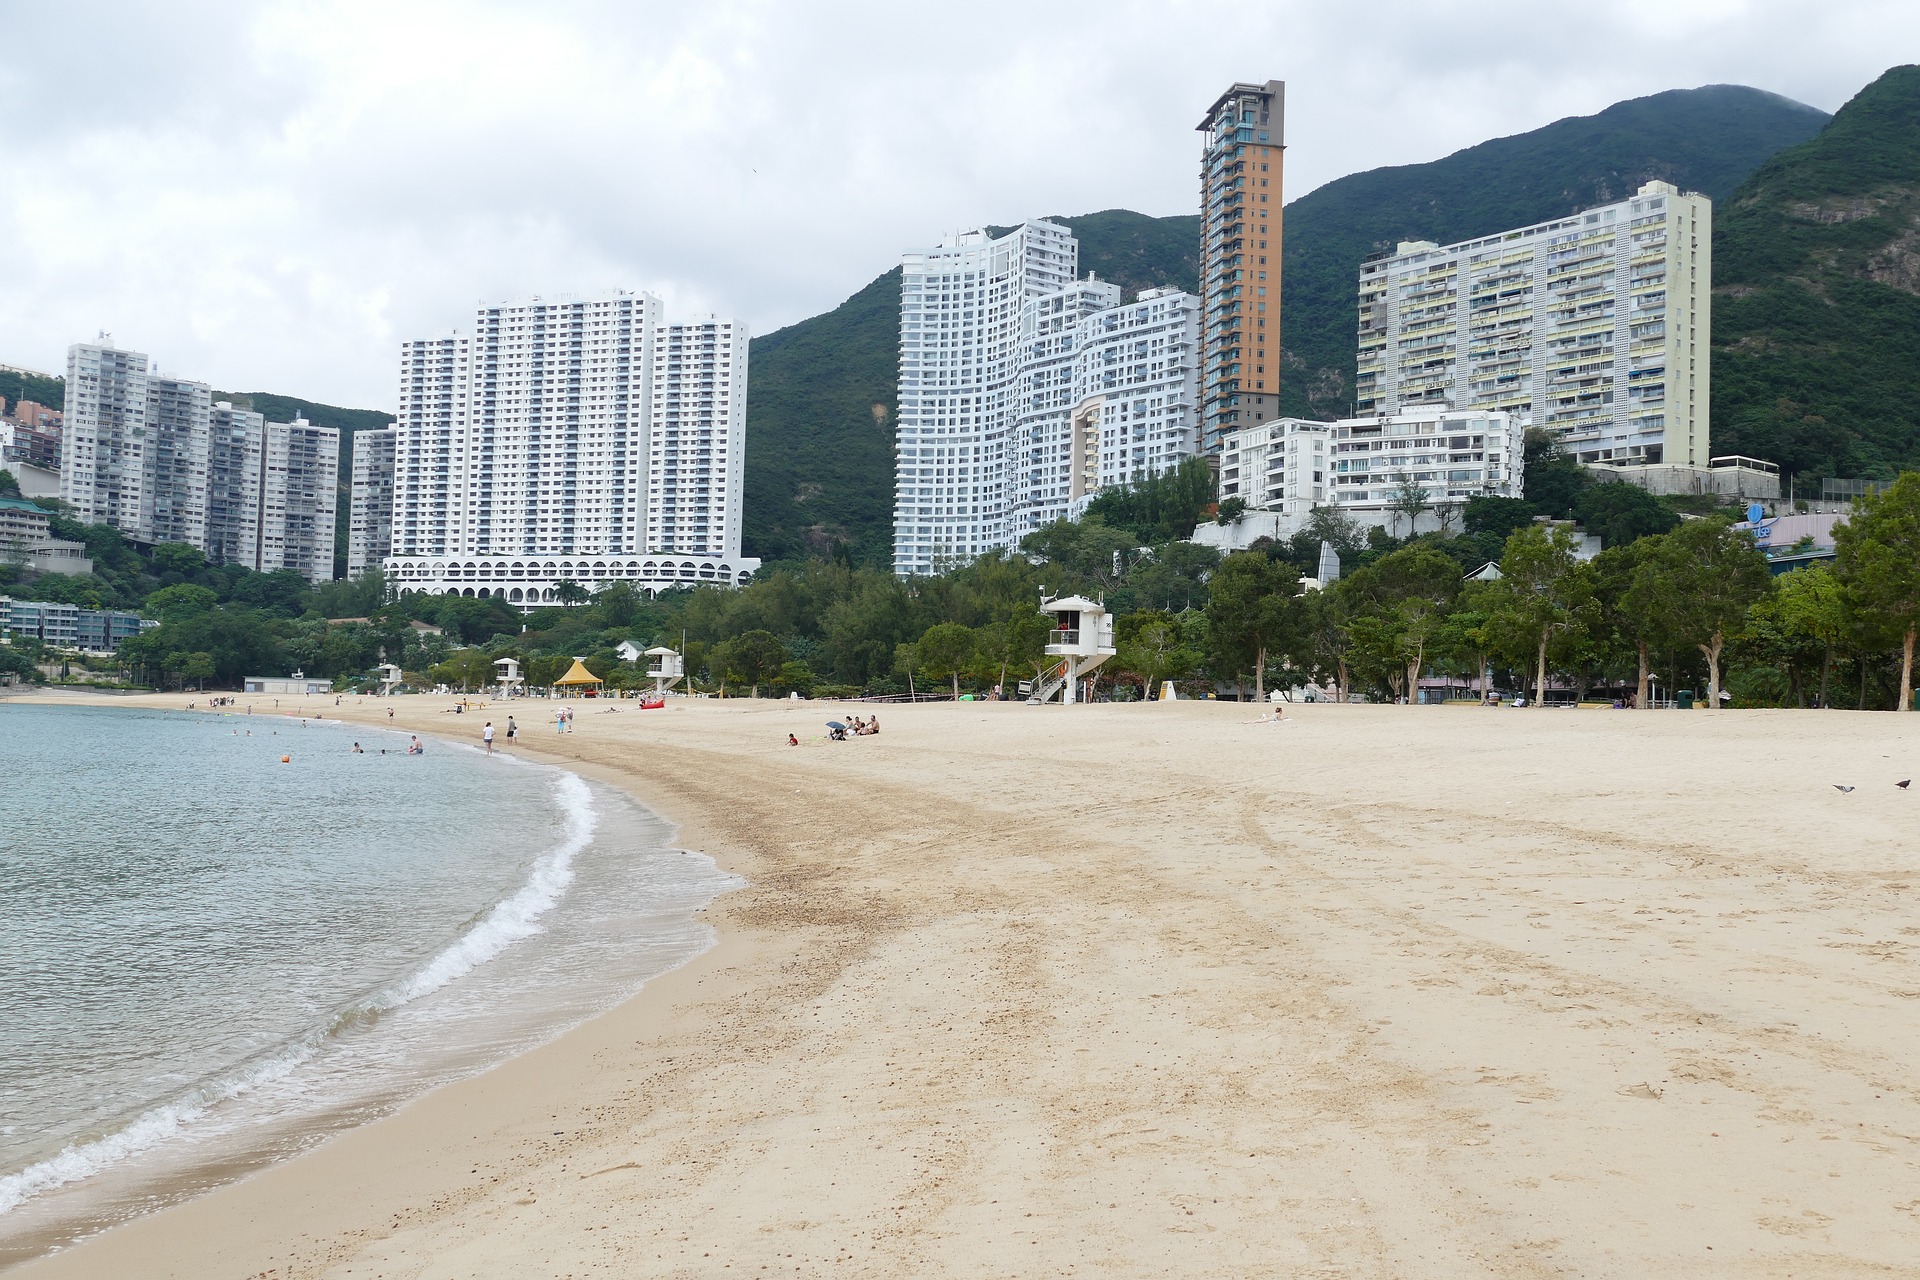 ocean and beachfront with luxury towers in hong kong's repulse bay